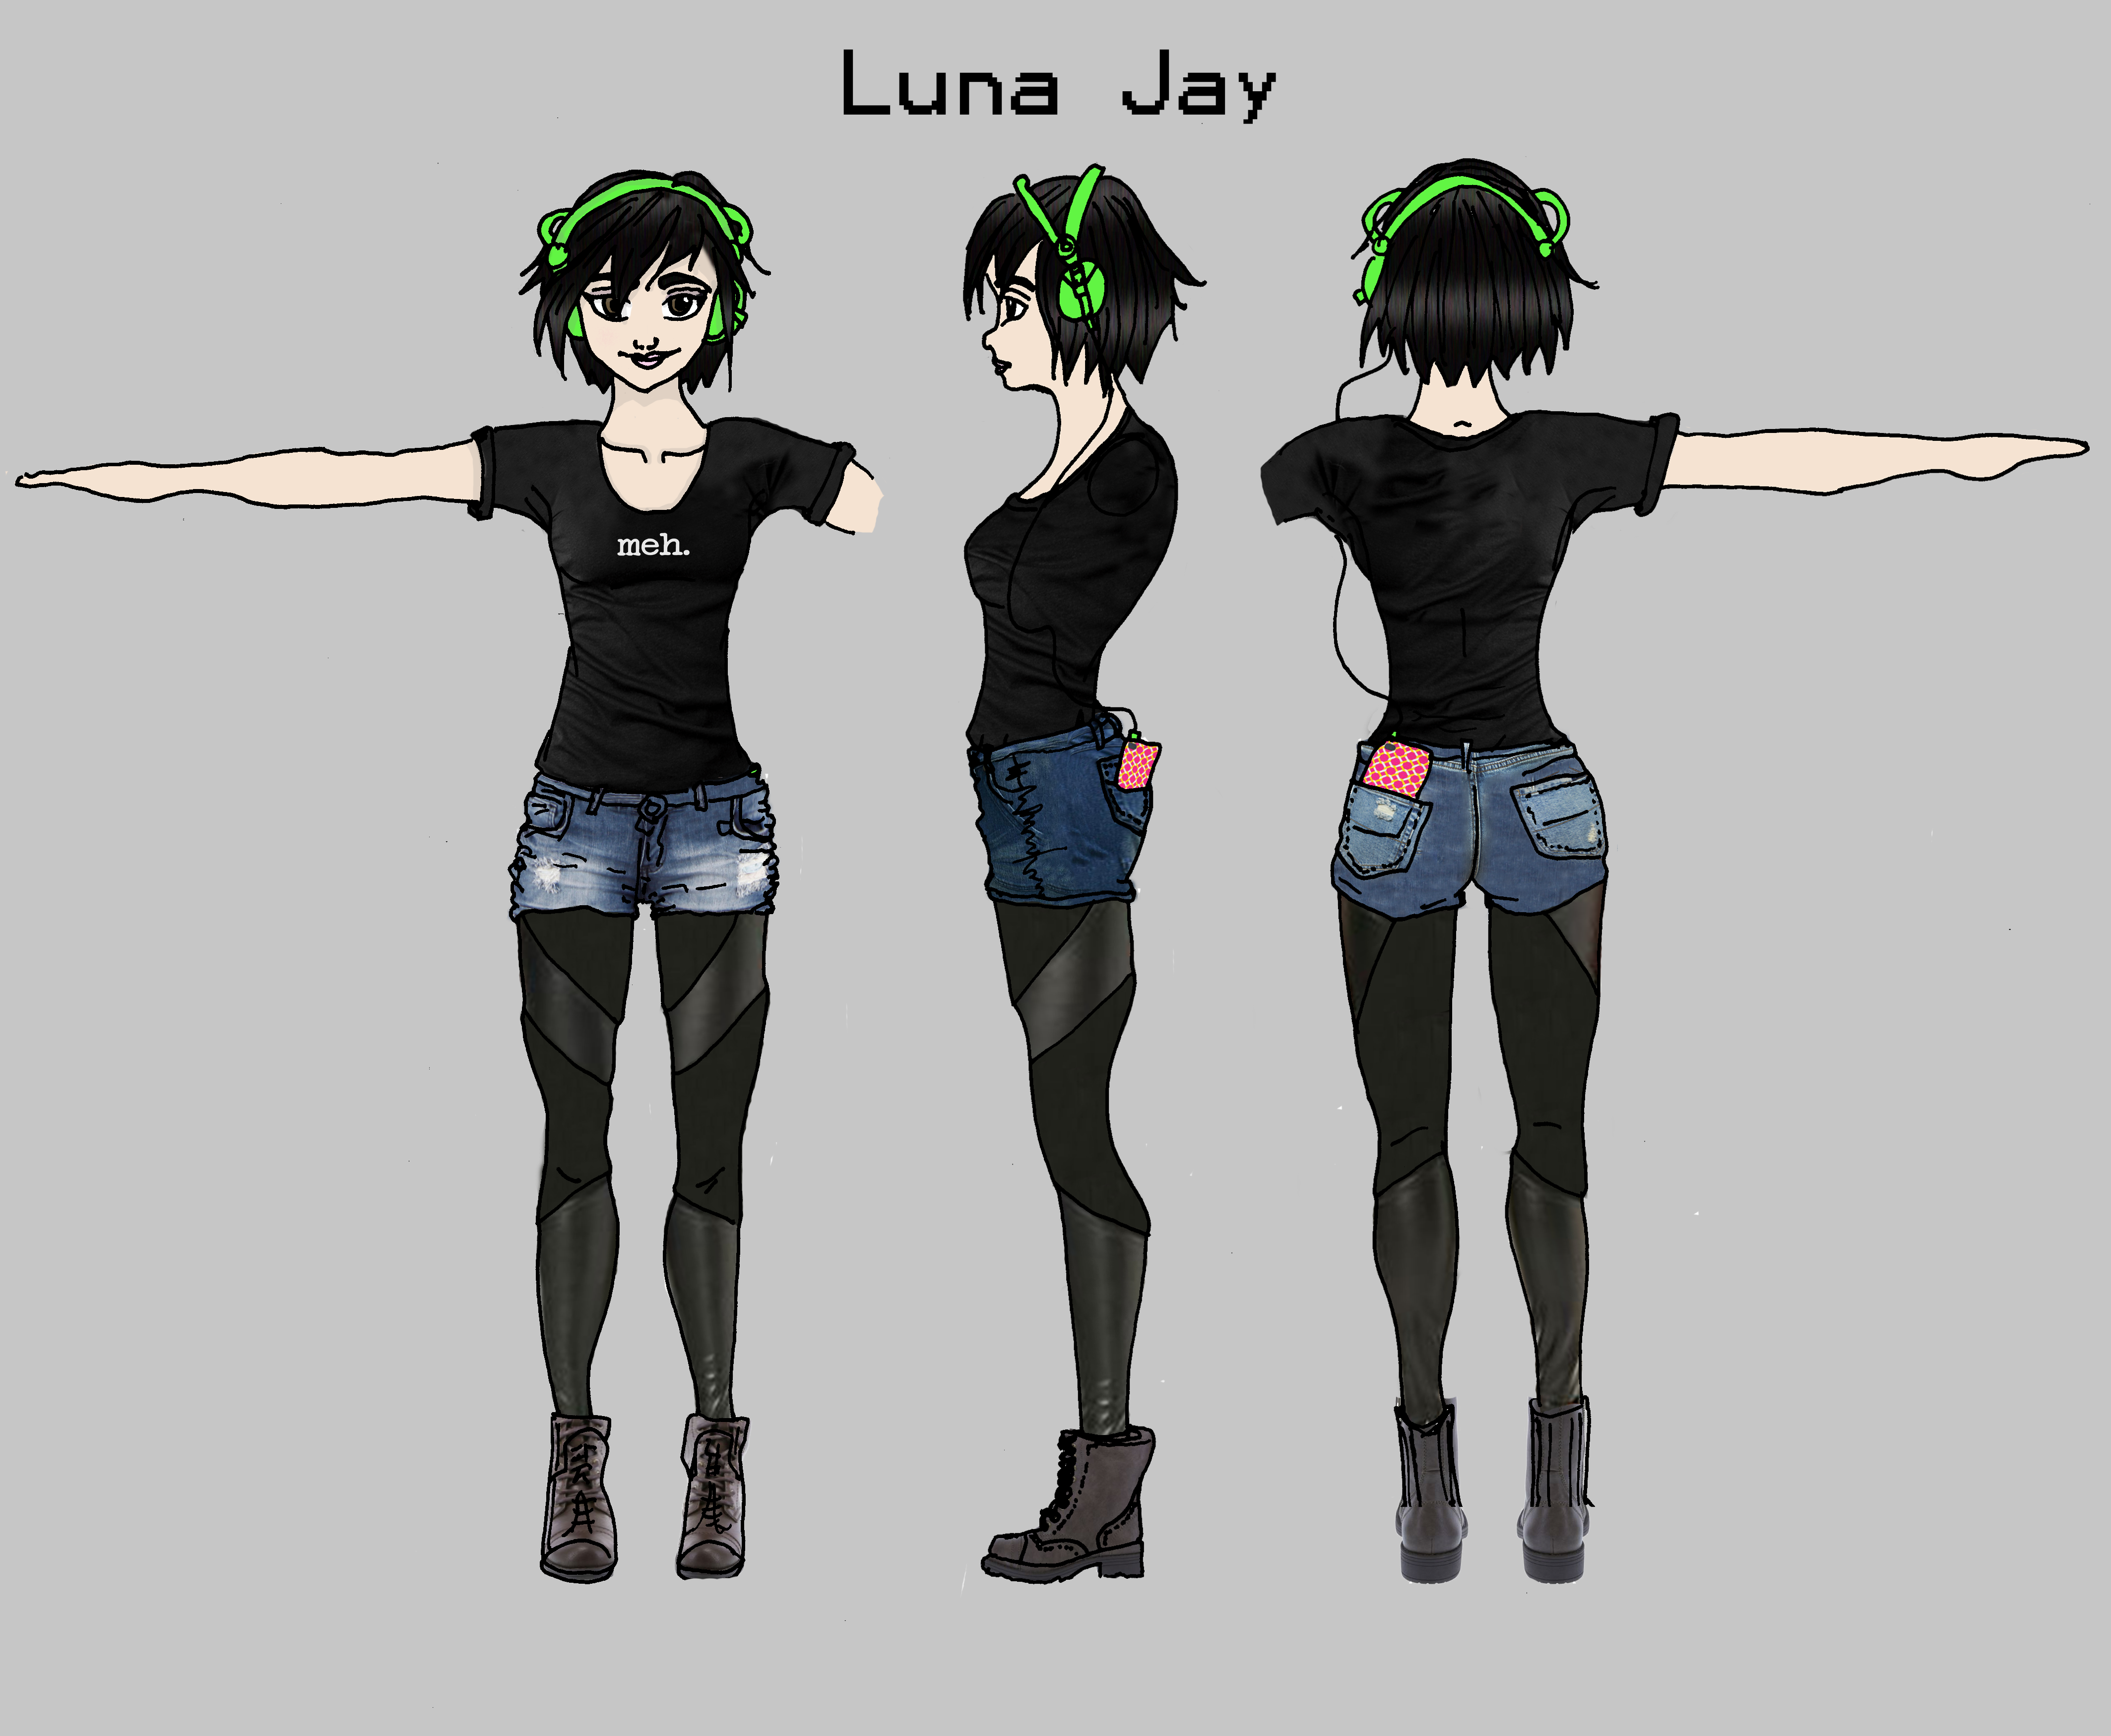 Character Sheet for Luna Jay